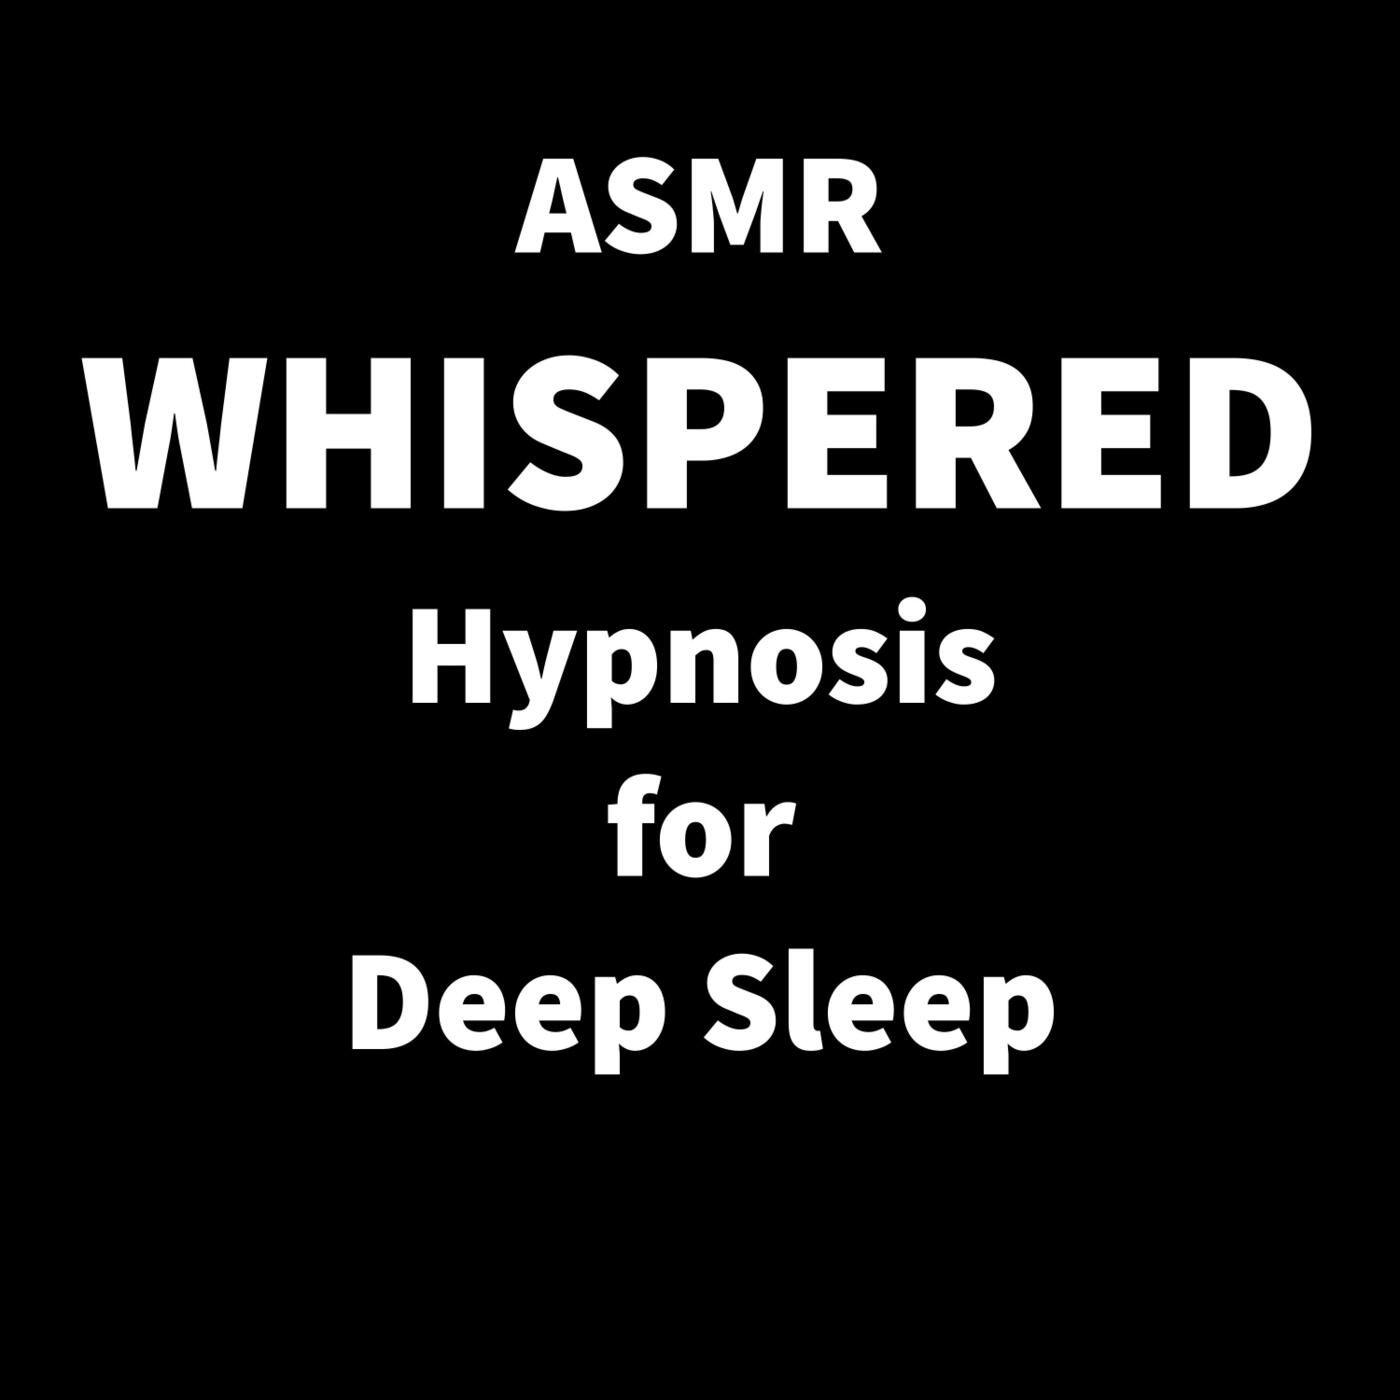 bob waidelich recommends asmr sleep hypnosis pic